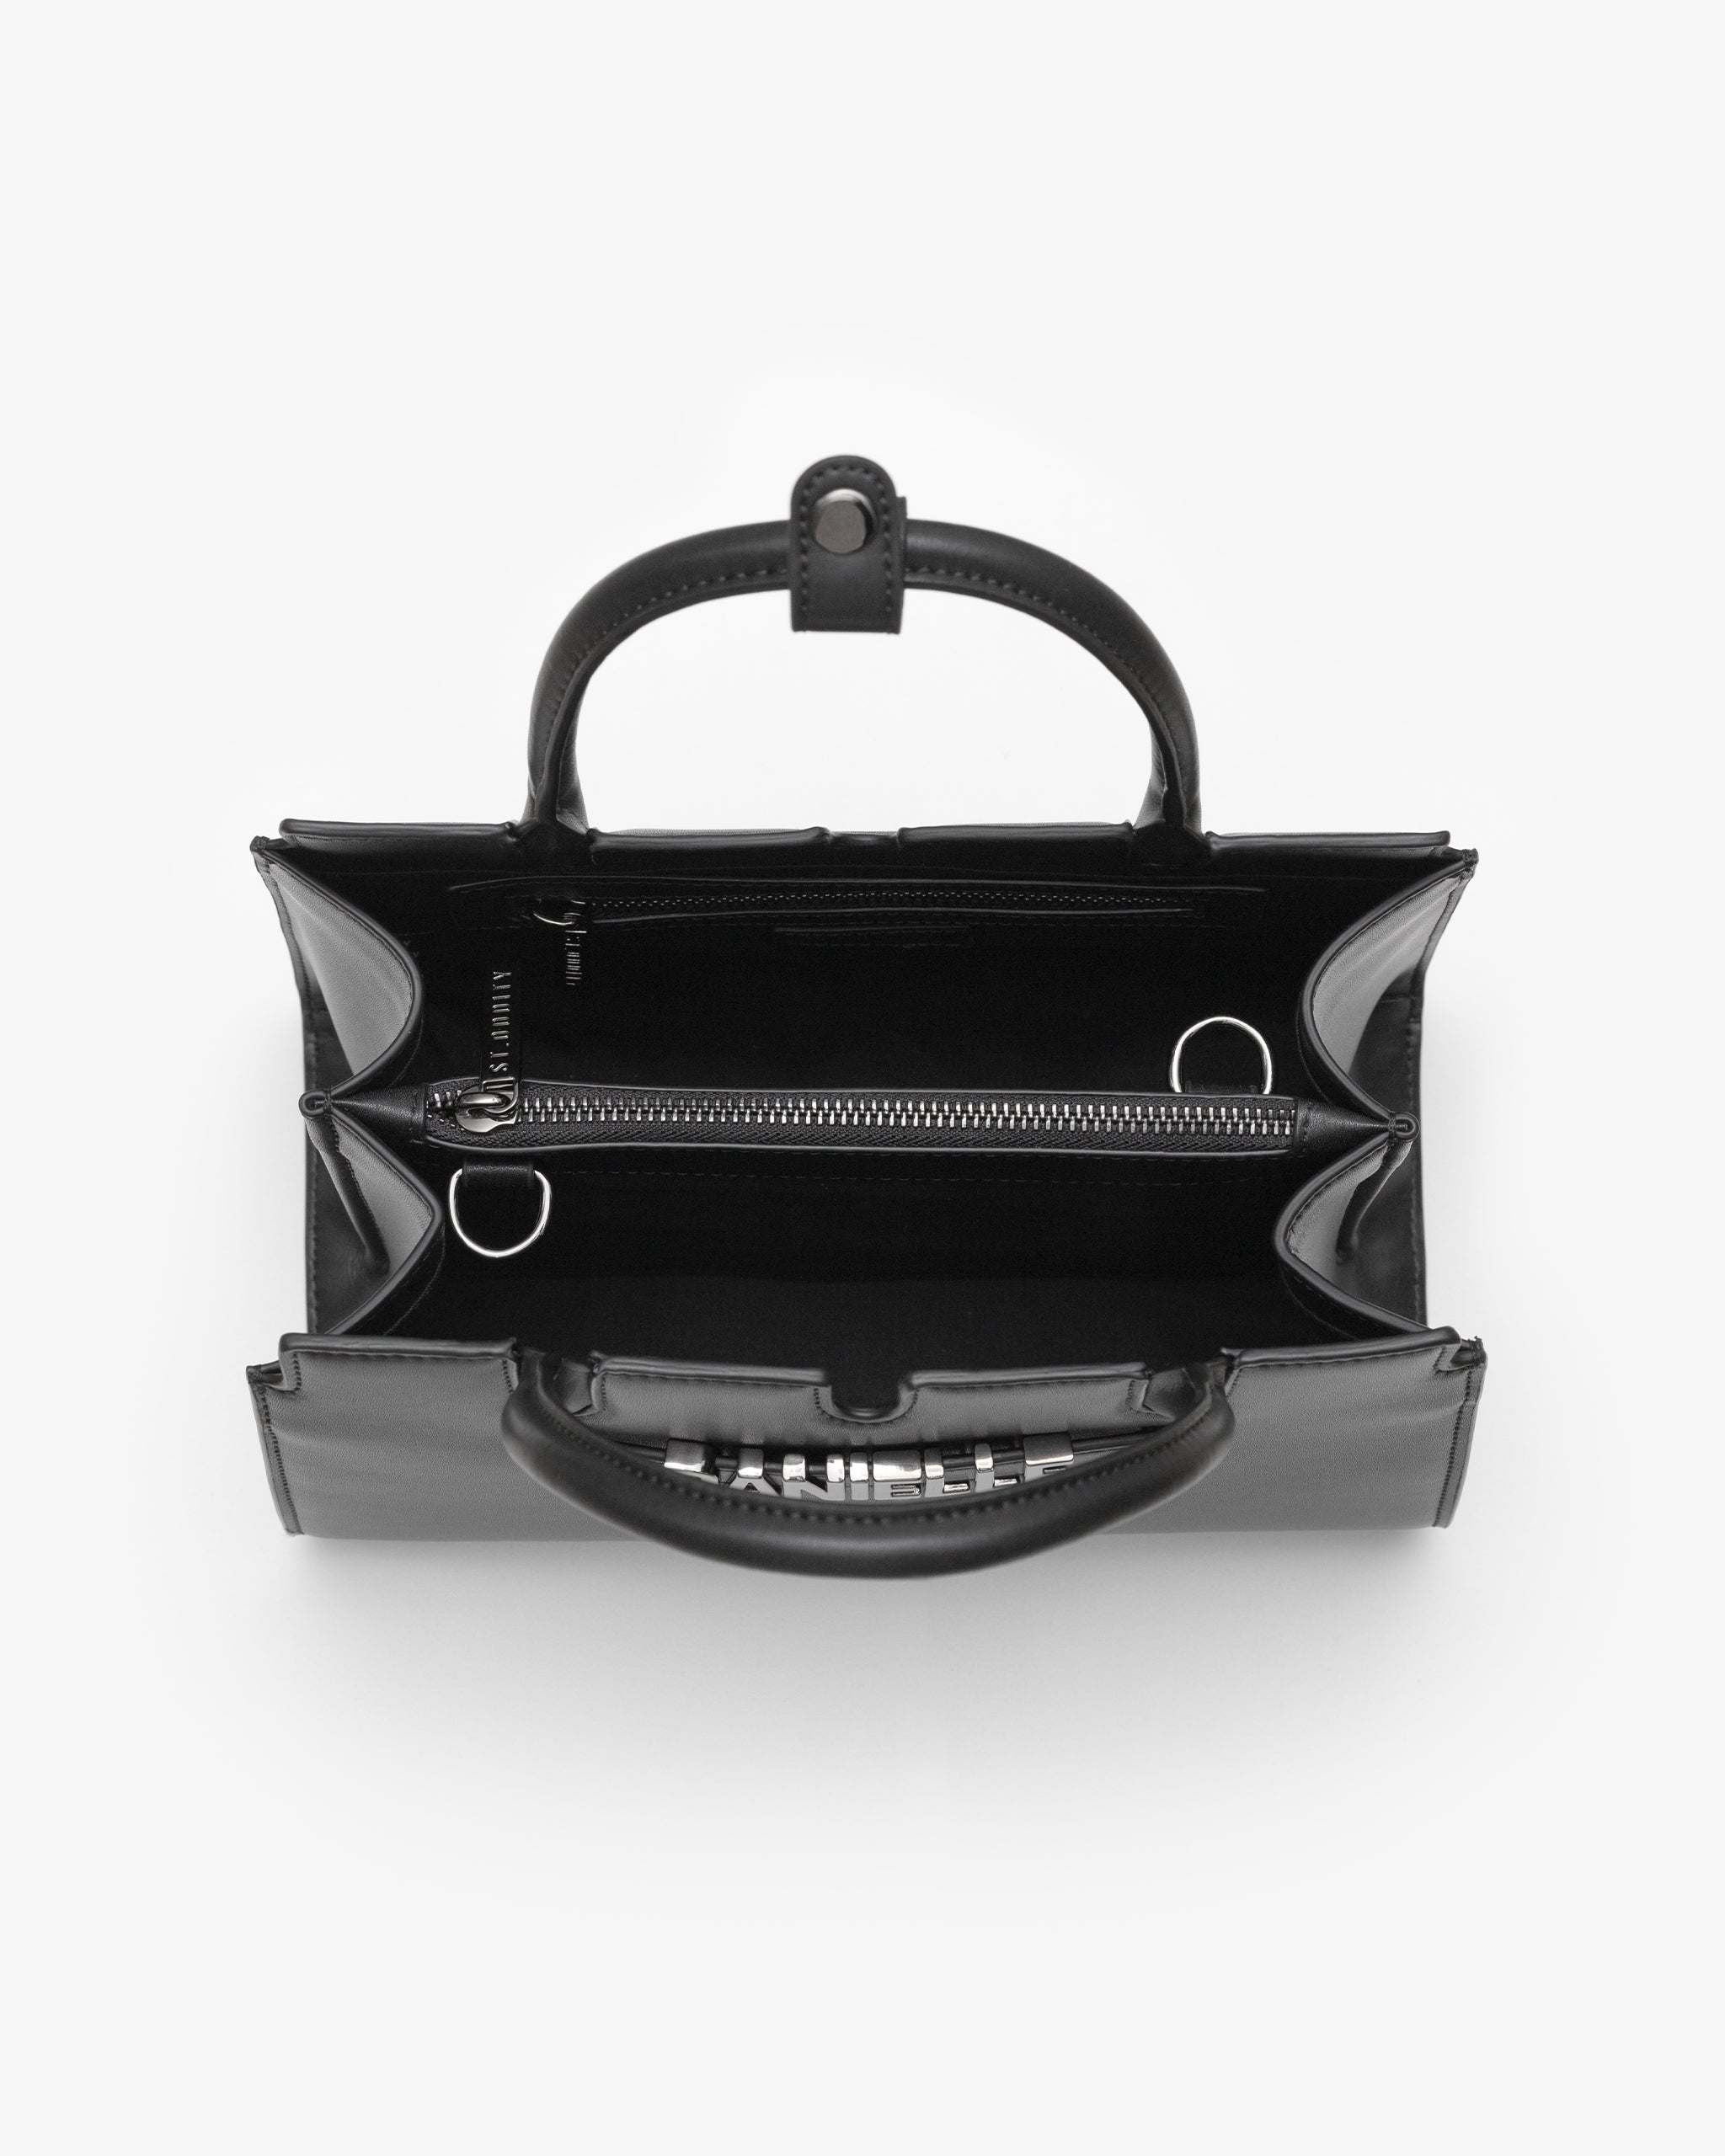 All Day Top Handle Bag in Black/Gunmetal with Personalised Hardware